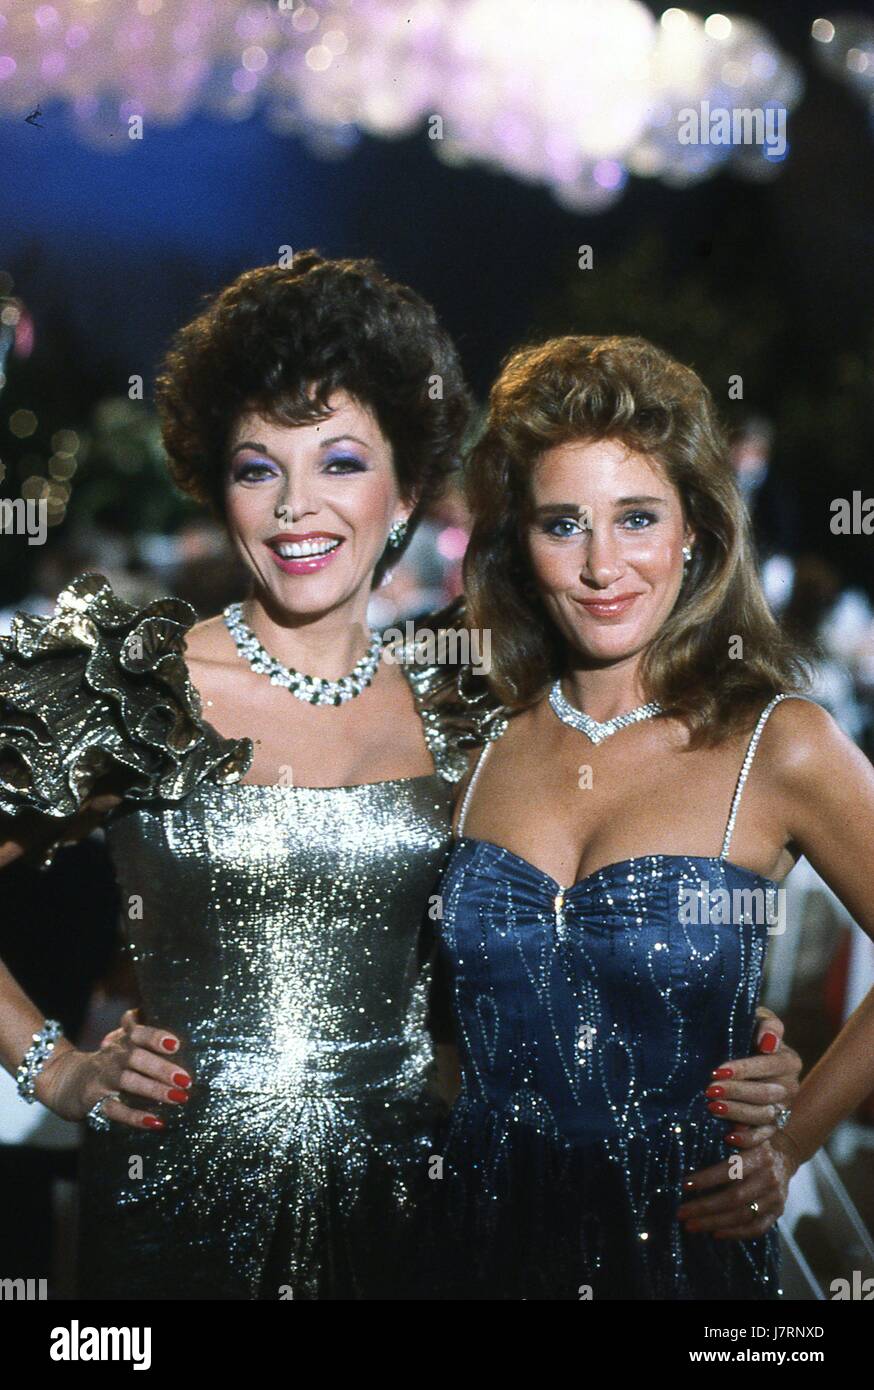 Page 2 - Dynasty Joan Collins High Resolution Stock Photography and ...